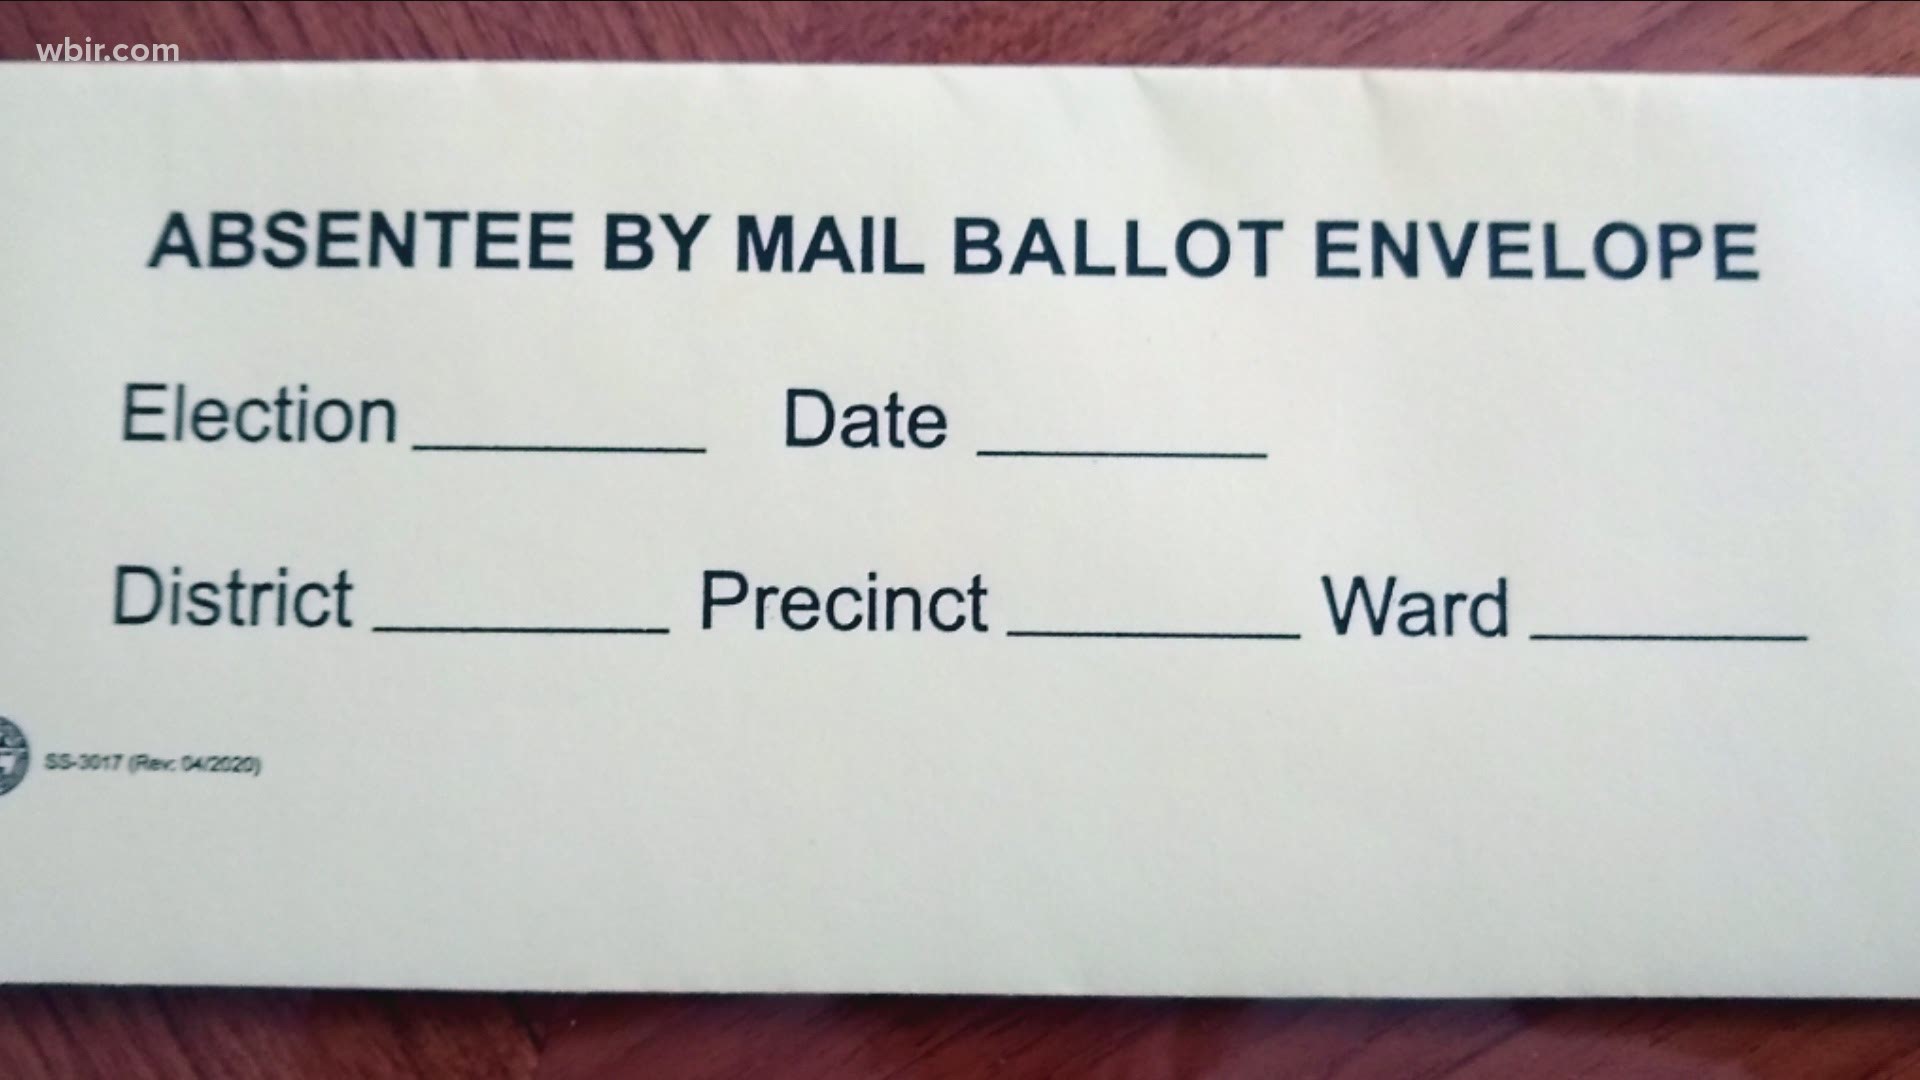 Answering your election questions -- this one about an envelope that comes with the absentee ballot.